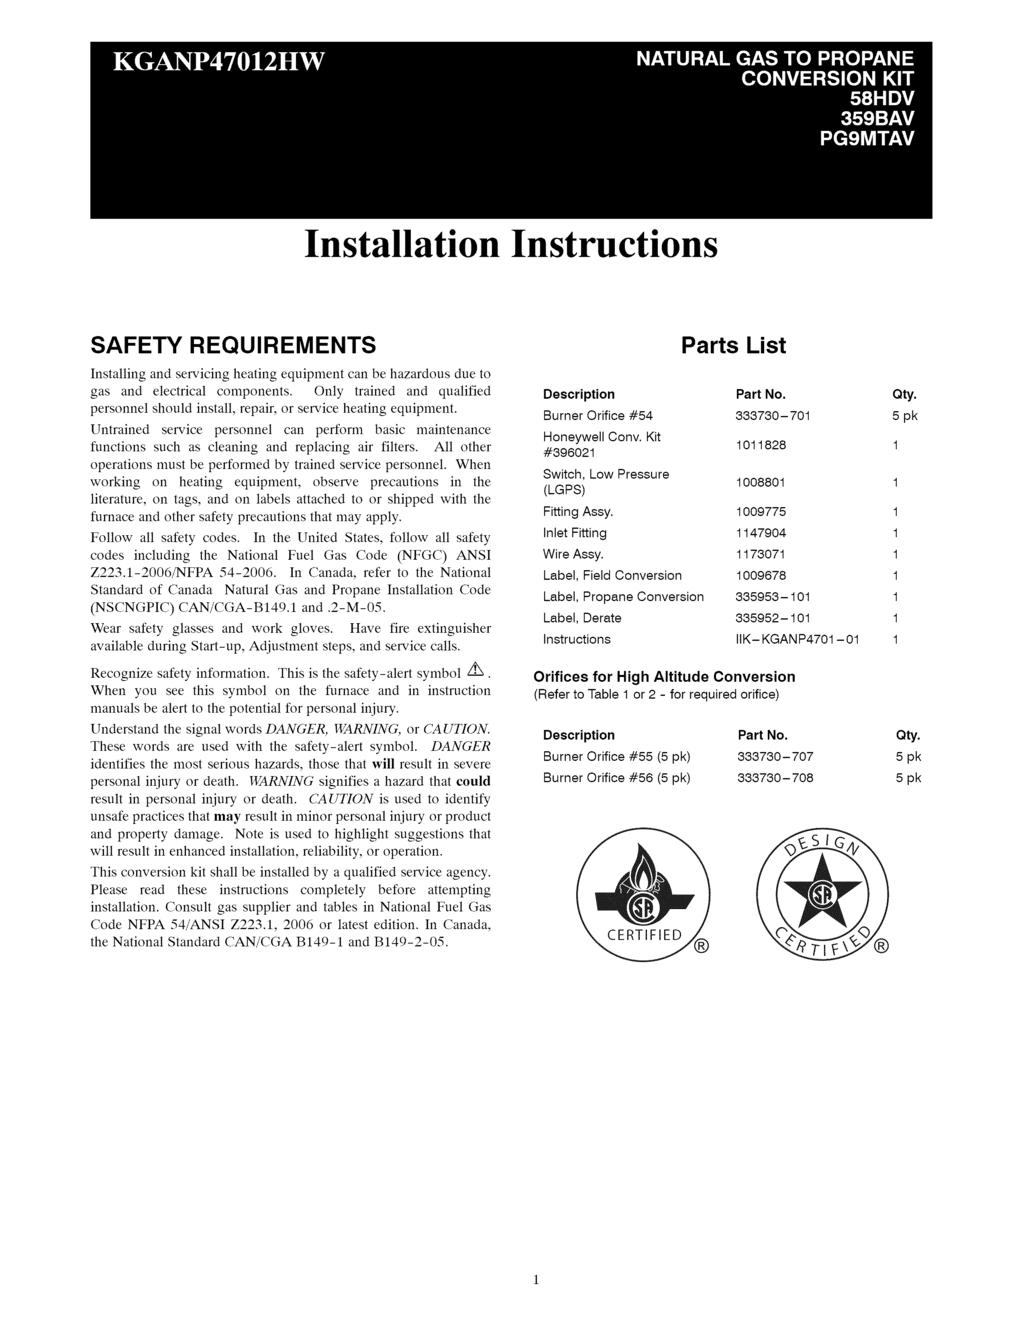 Installation Instructions SAFETY REQUIREMENTS Parts List Installing and servicing heating equipment can be hazardous due to gas and electrical components.